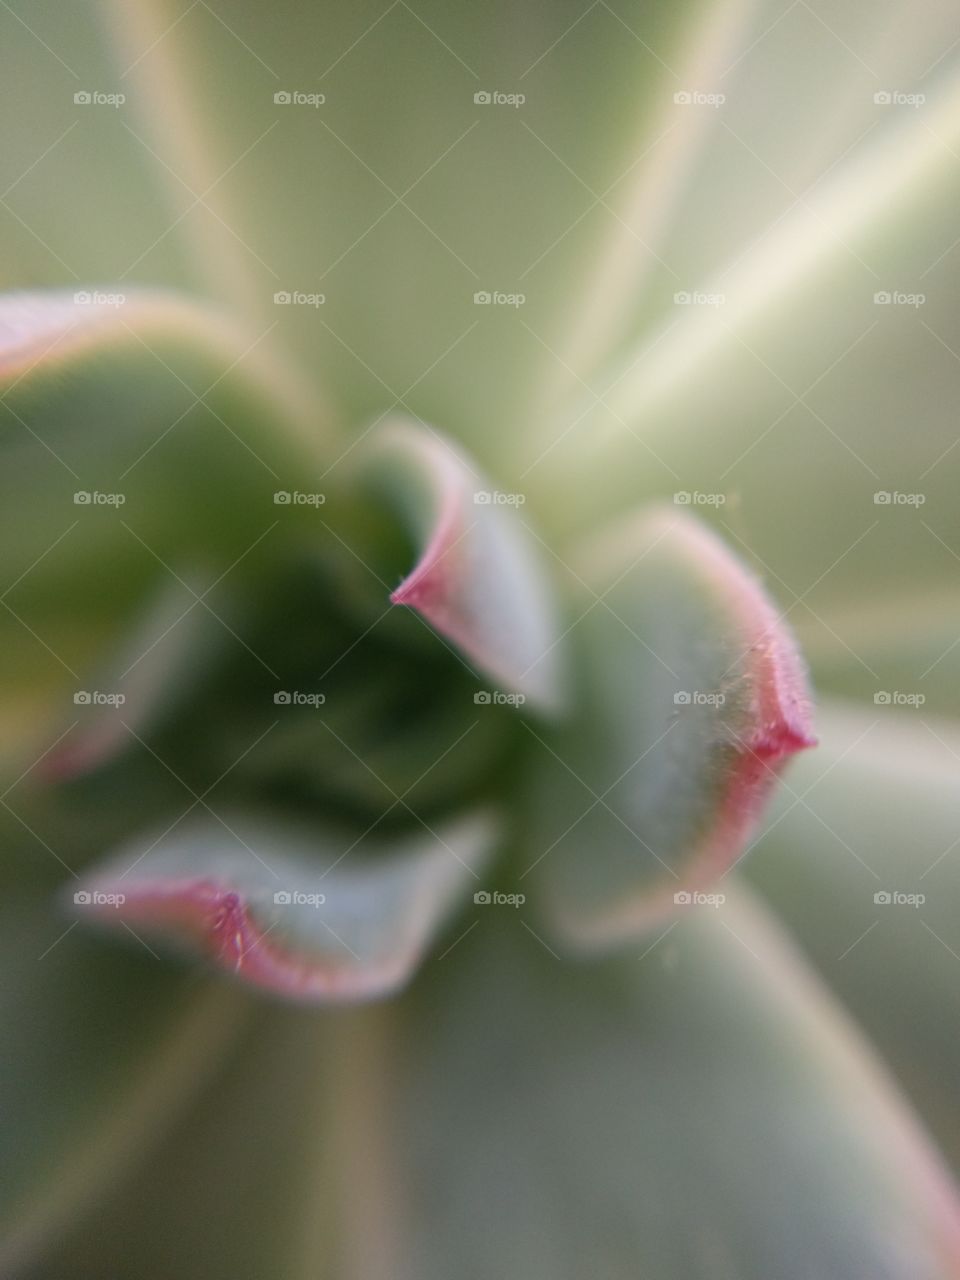 Extreme close-up of succulent plant